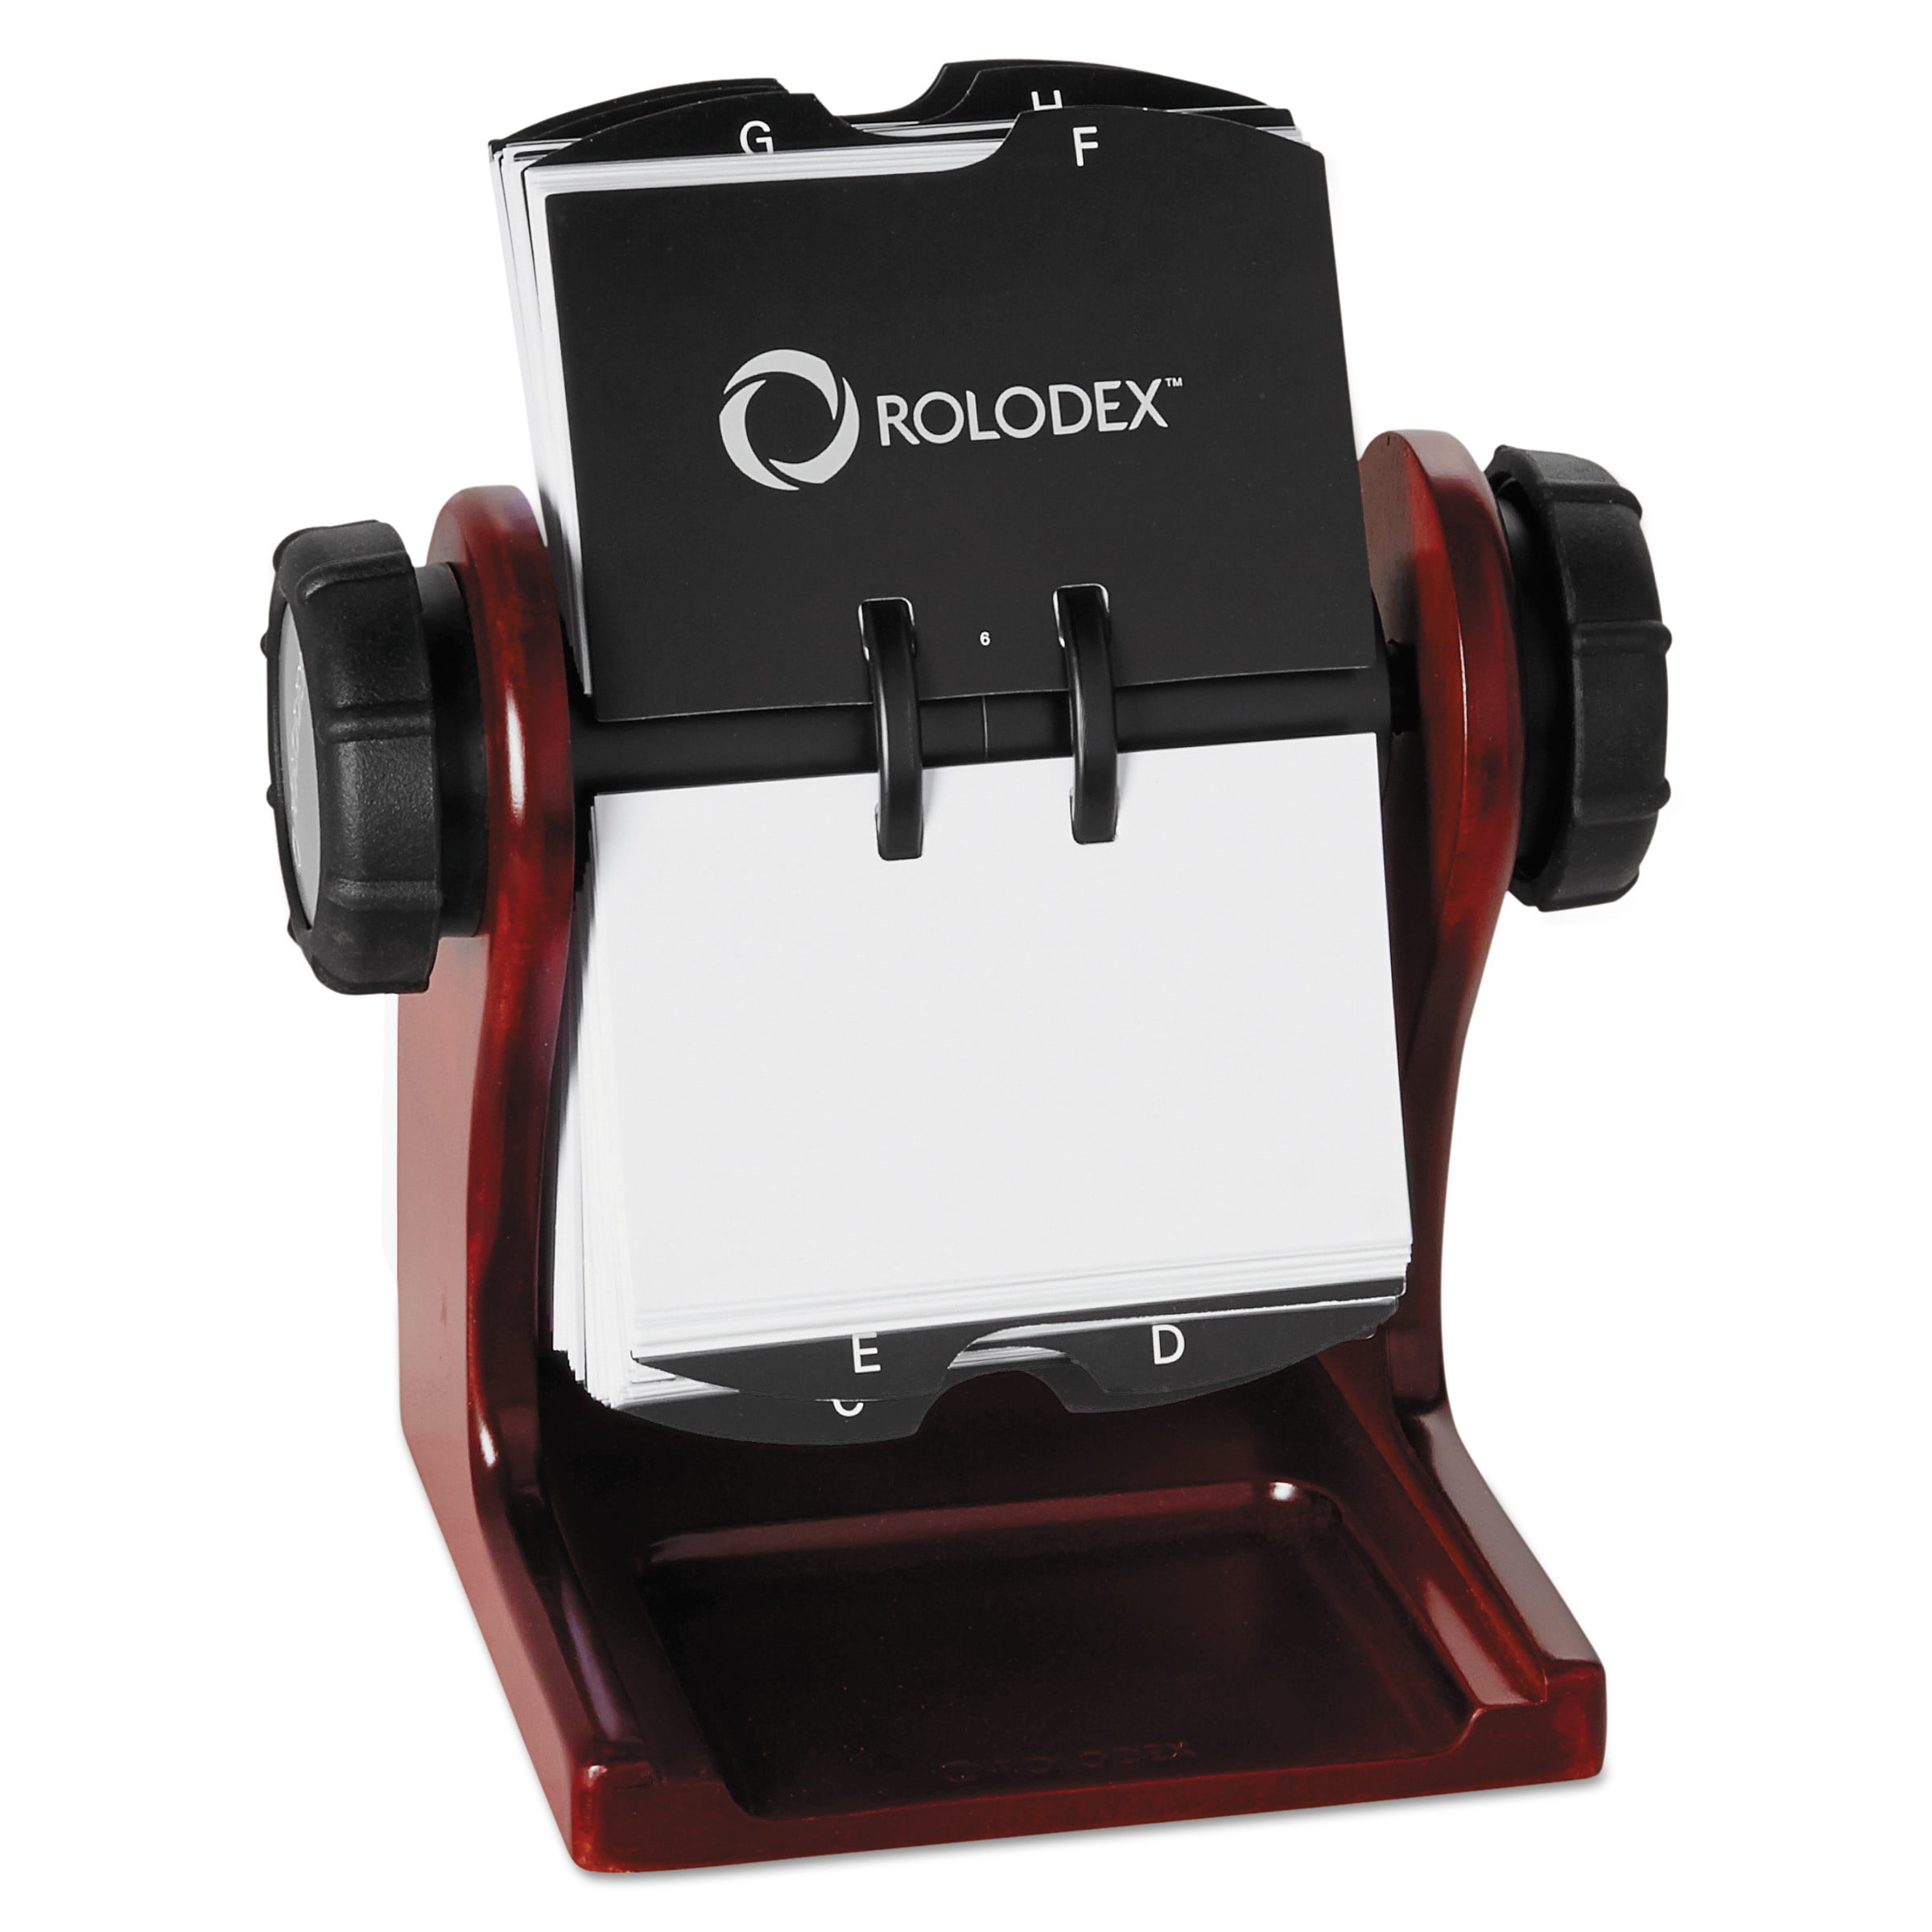 Includes 200 sleeves for up to 400 c Rolodex Classic 200 Rotary Card File Black 